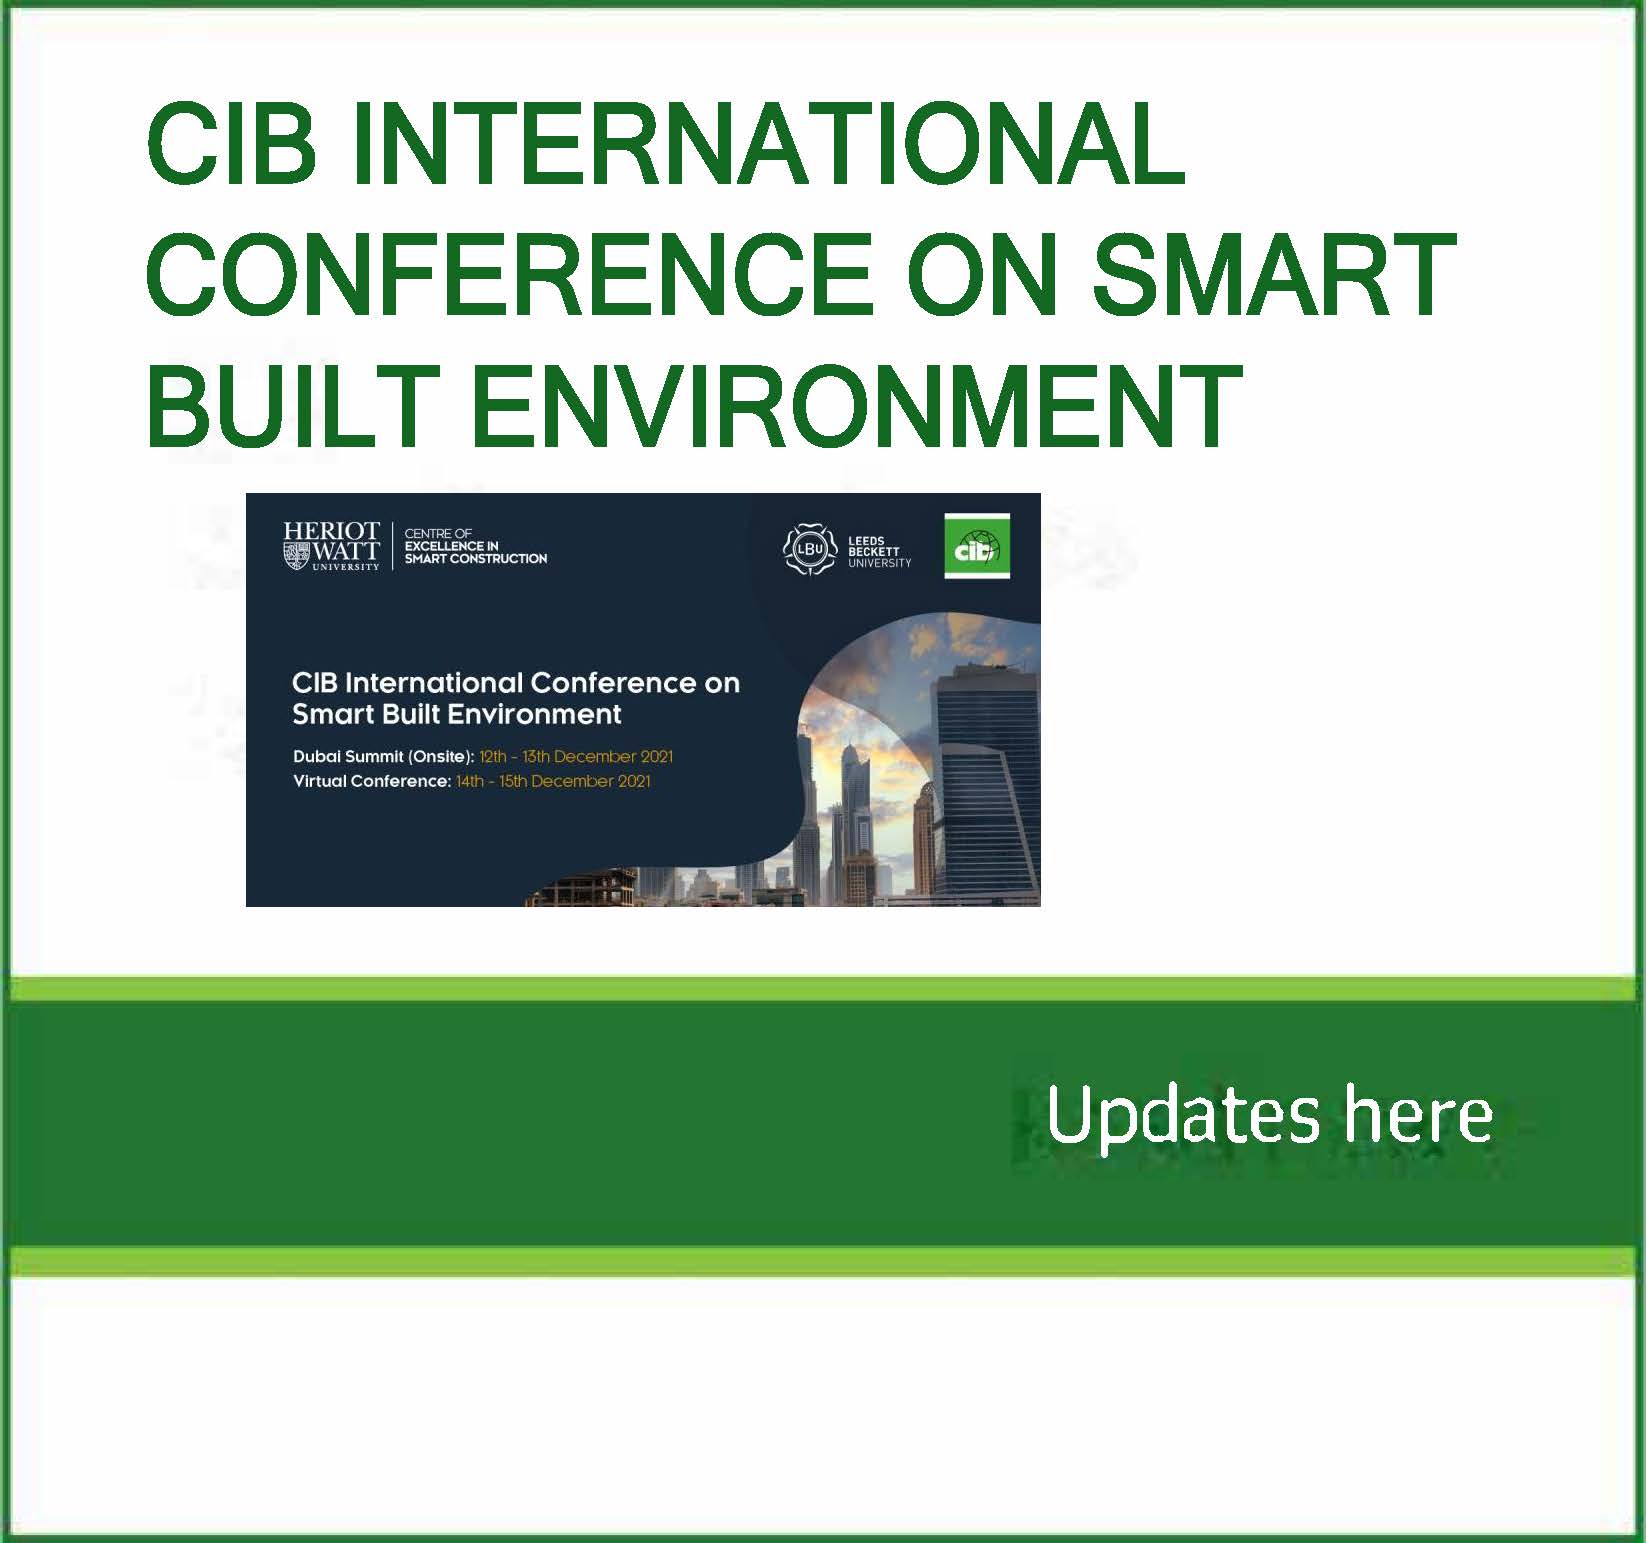 CIB International Conference on Smart Built Environment  14-21 December 2021 (now 14-15 online only)